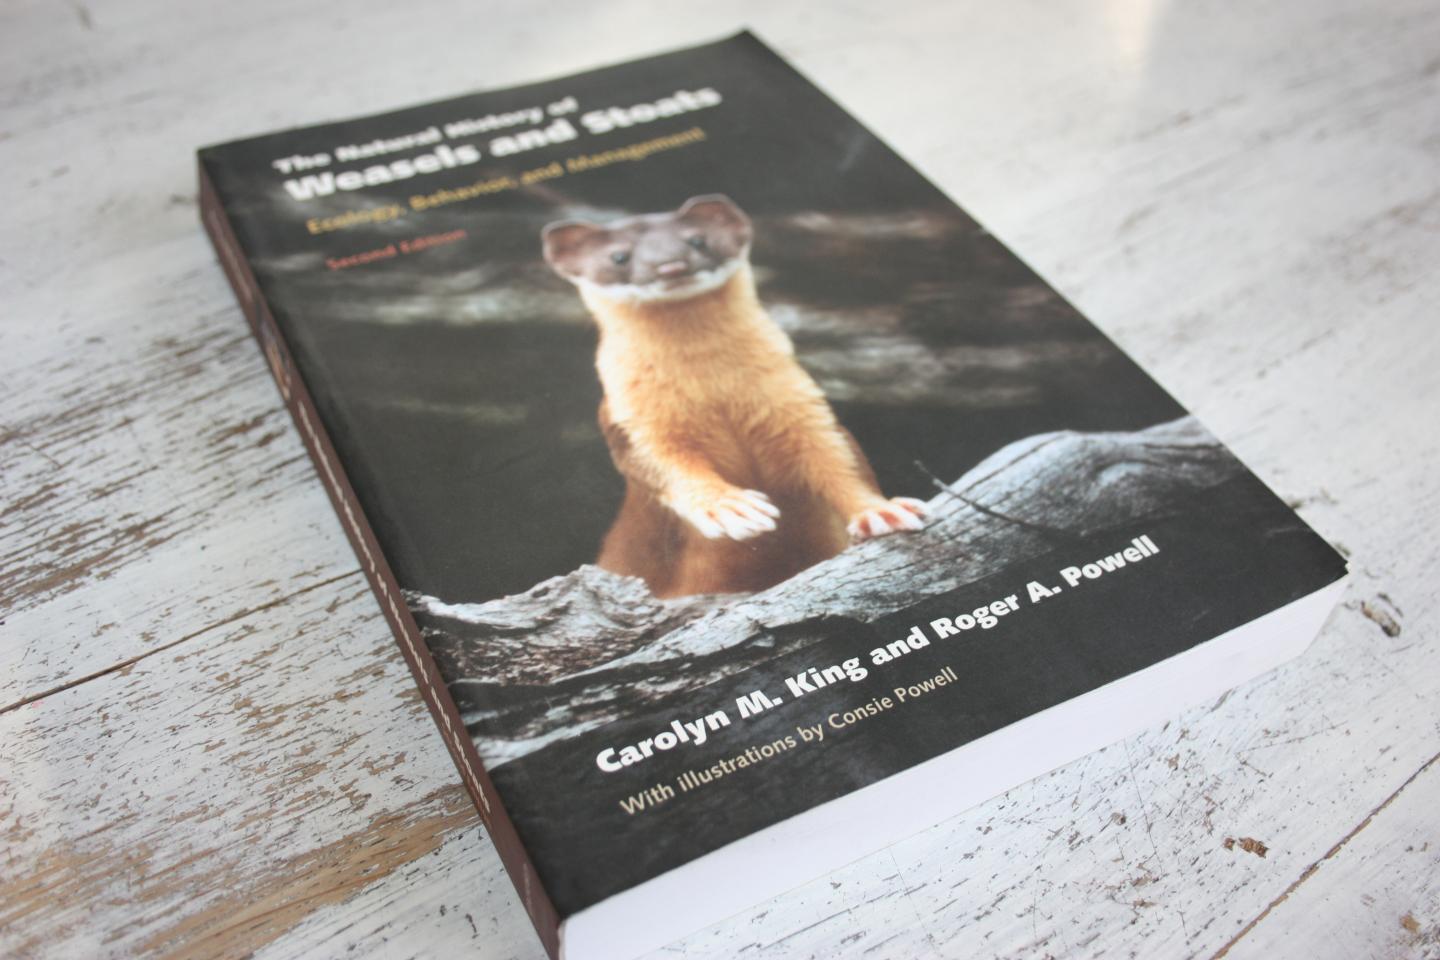 King, Carolyn M. and Powell, Roger A. - The Natural History of Weasels and Stoats